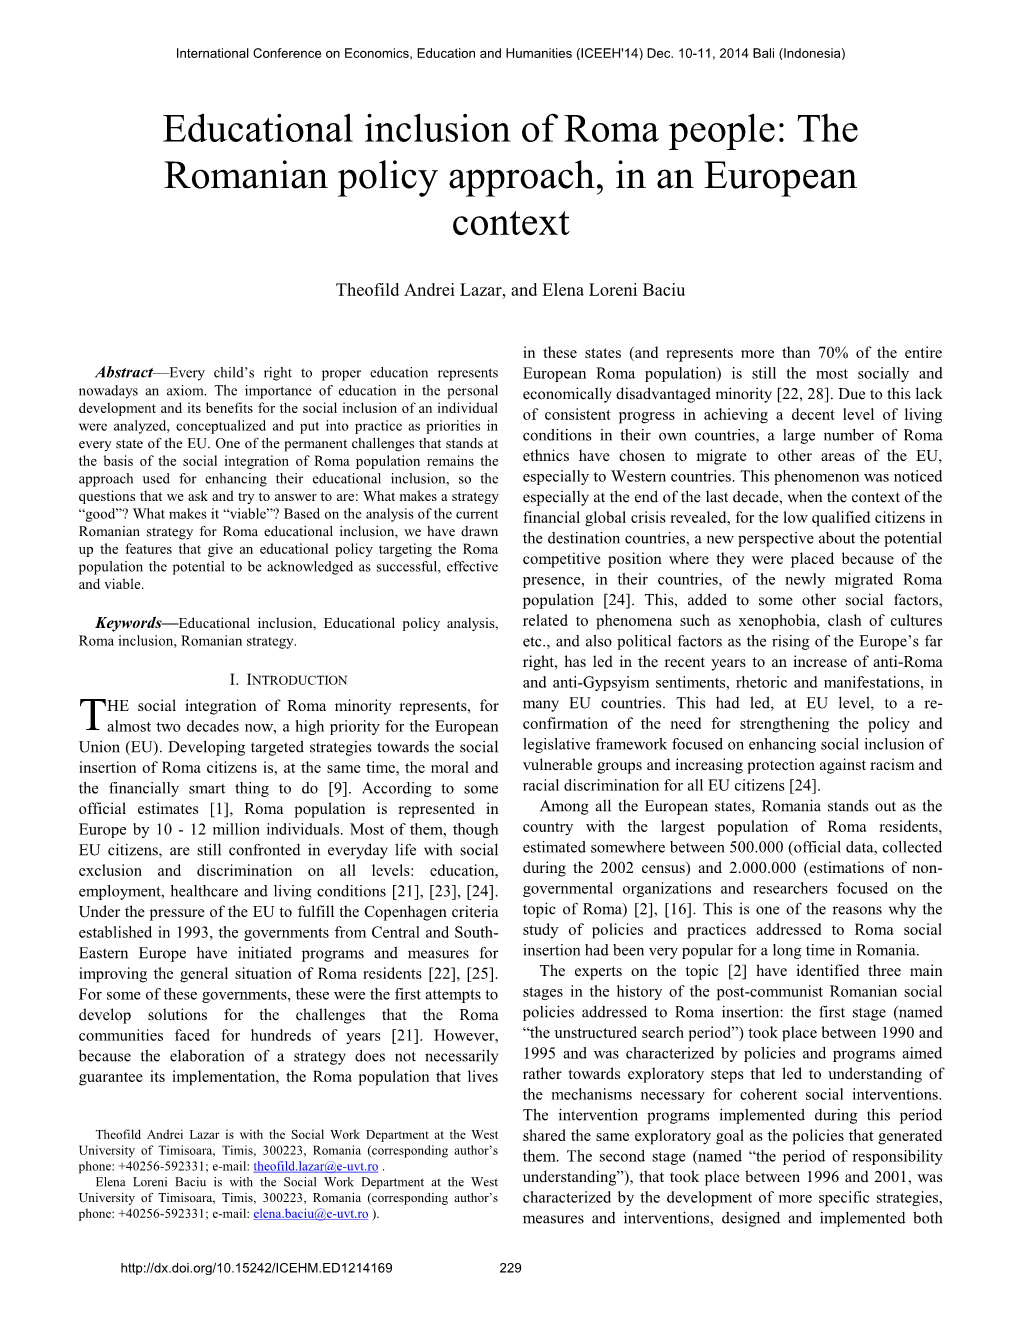 Educational Inclusion of Roma People: the Romanian Policy Approach, in an European Context